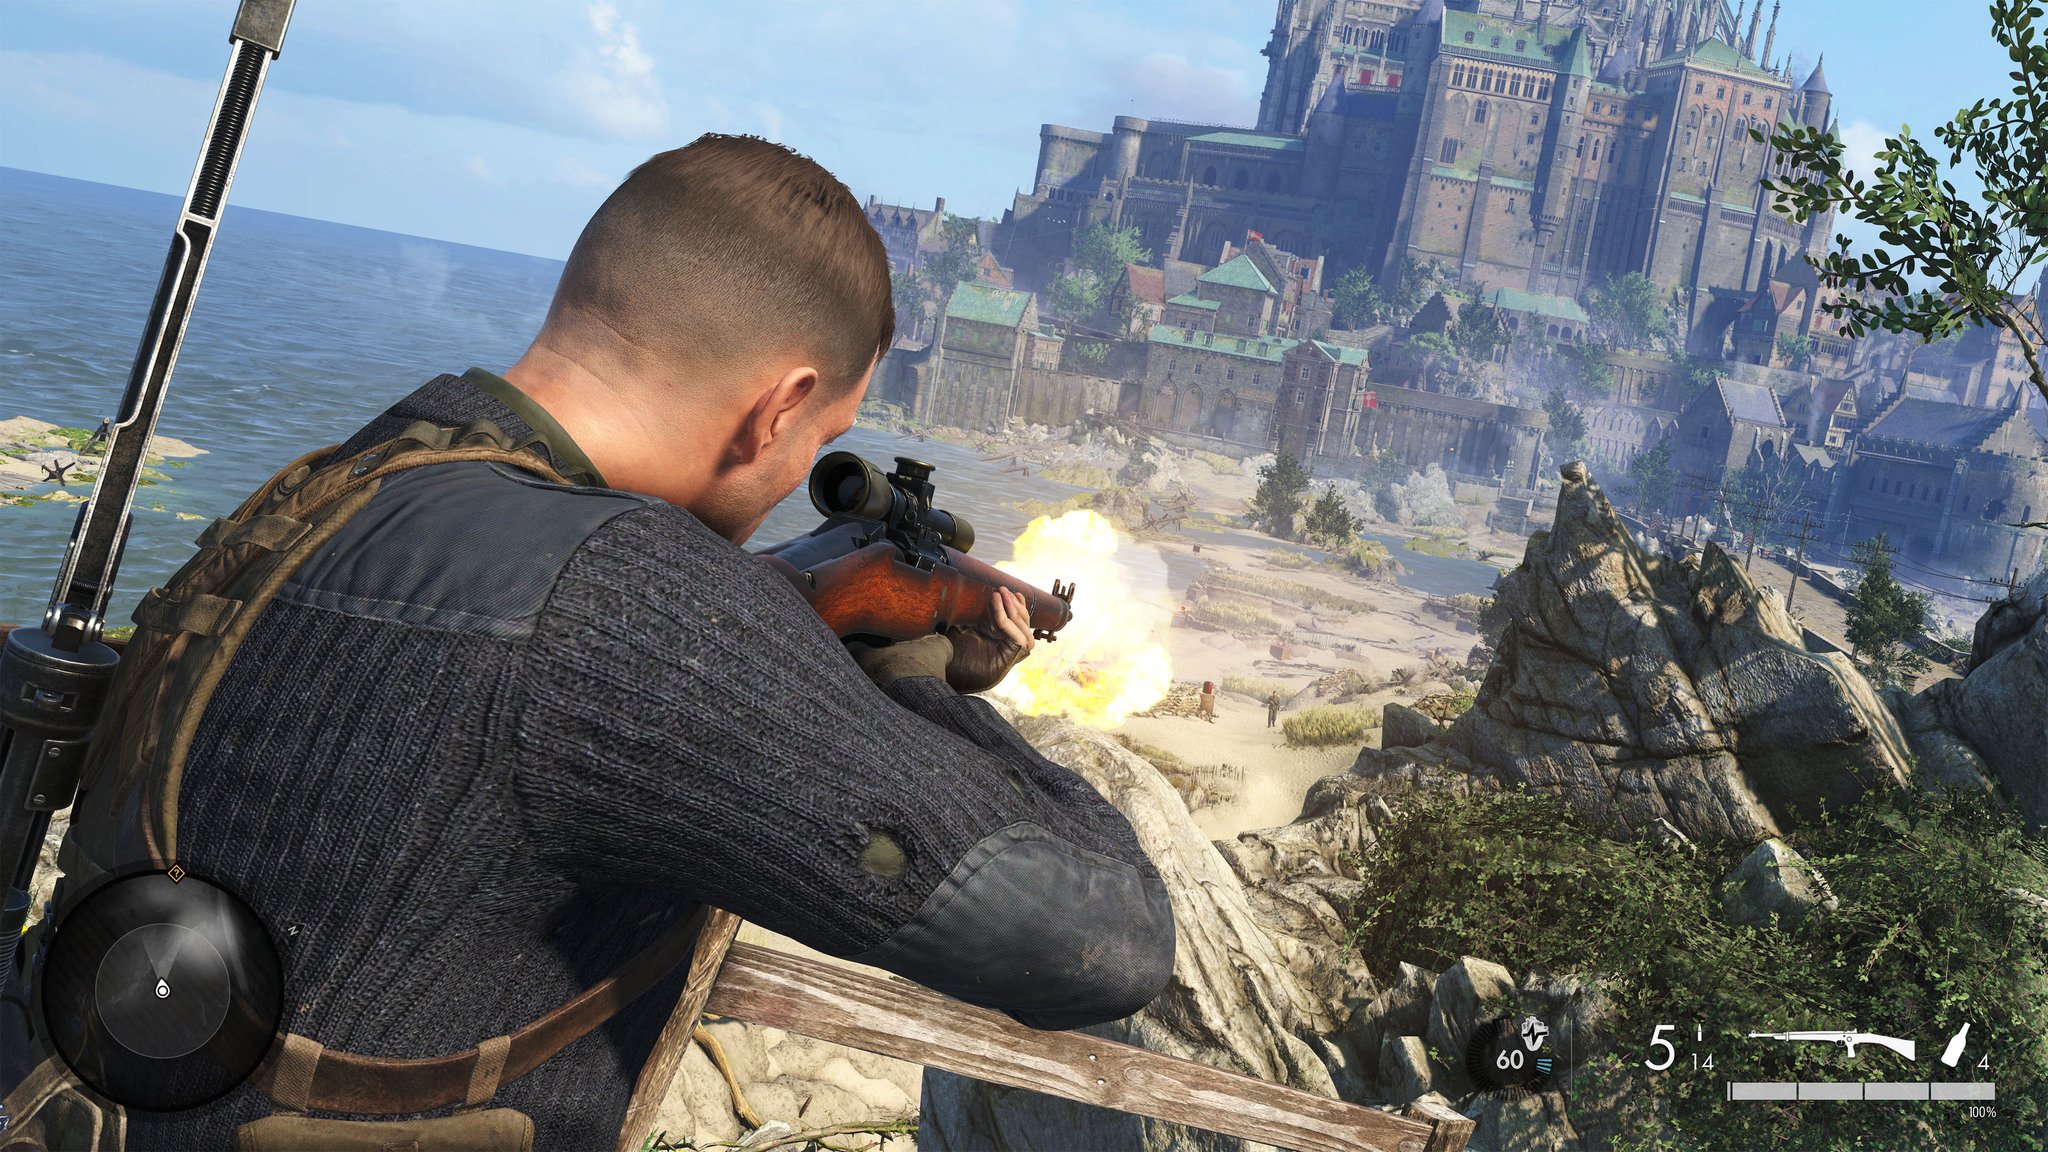 Sniper Elite 5 launching in 2022 as a day one Xbox Game Pass title Windows Central